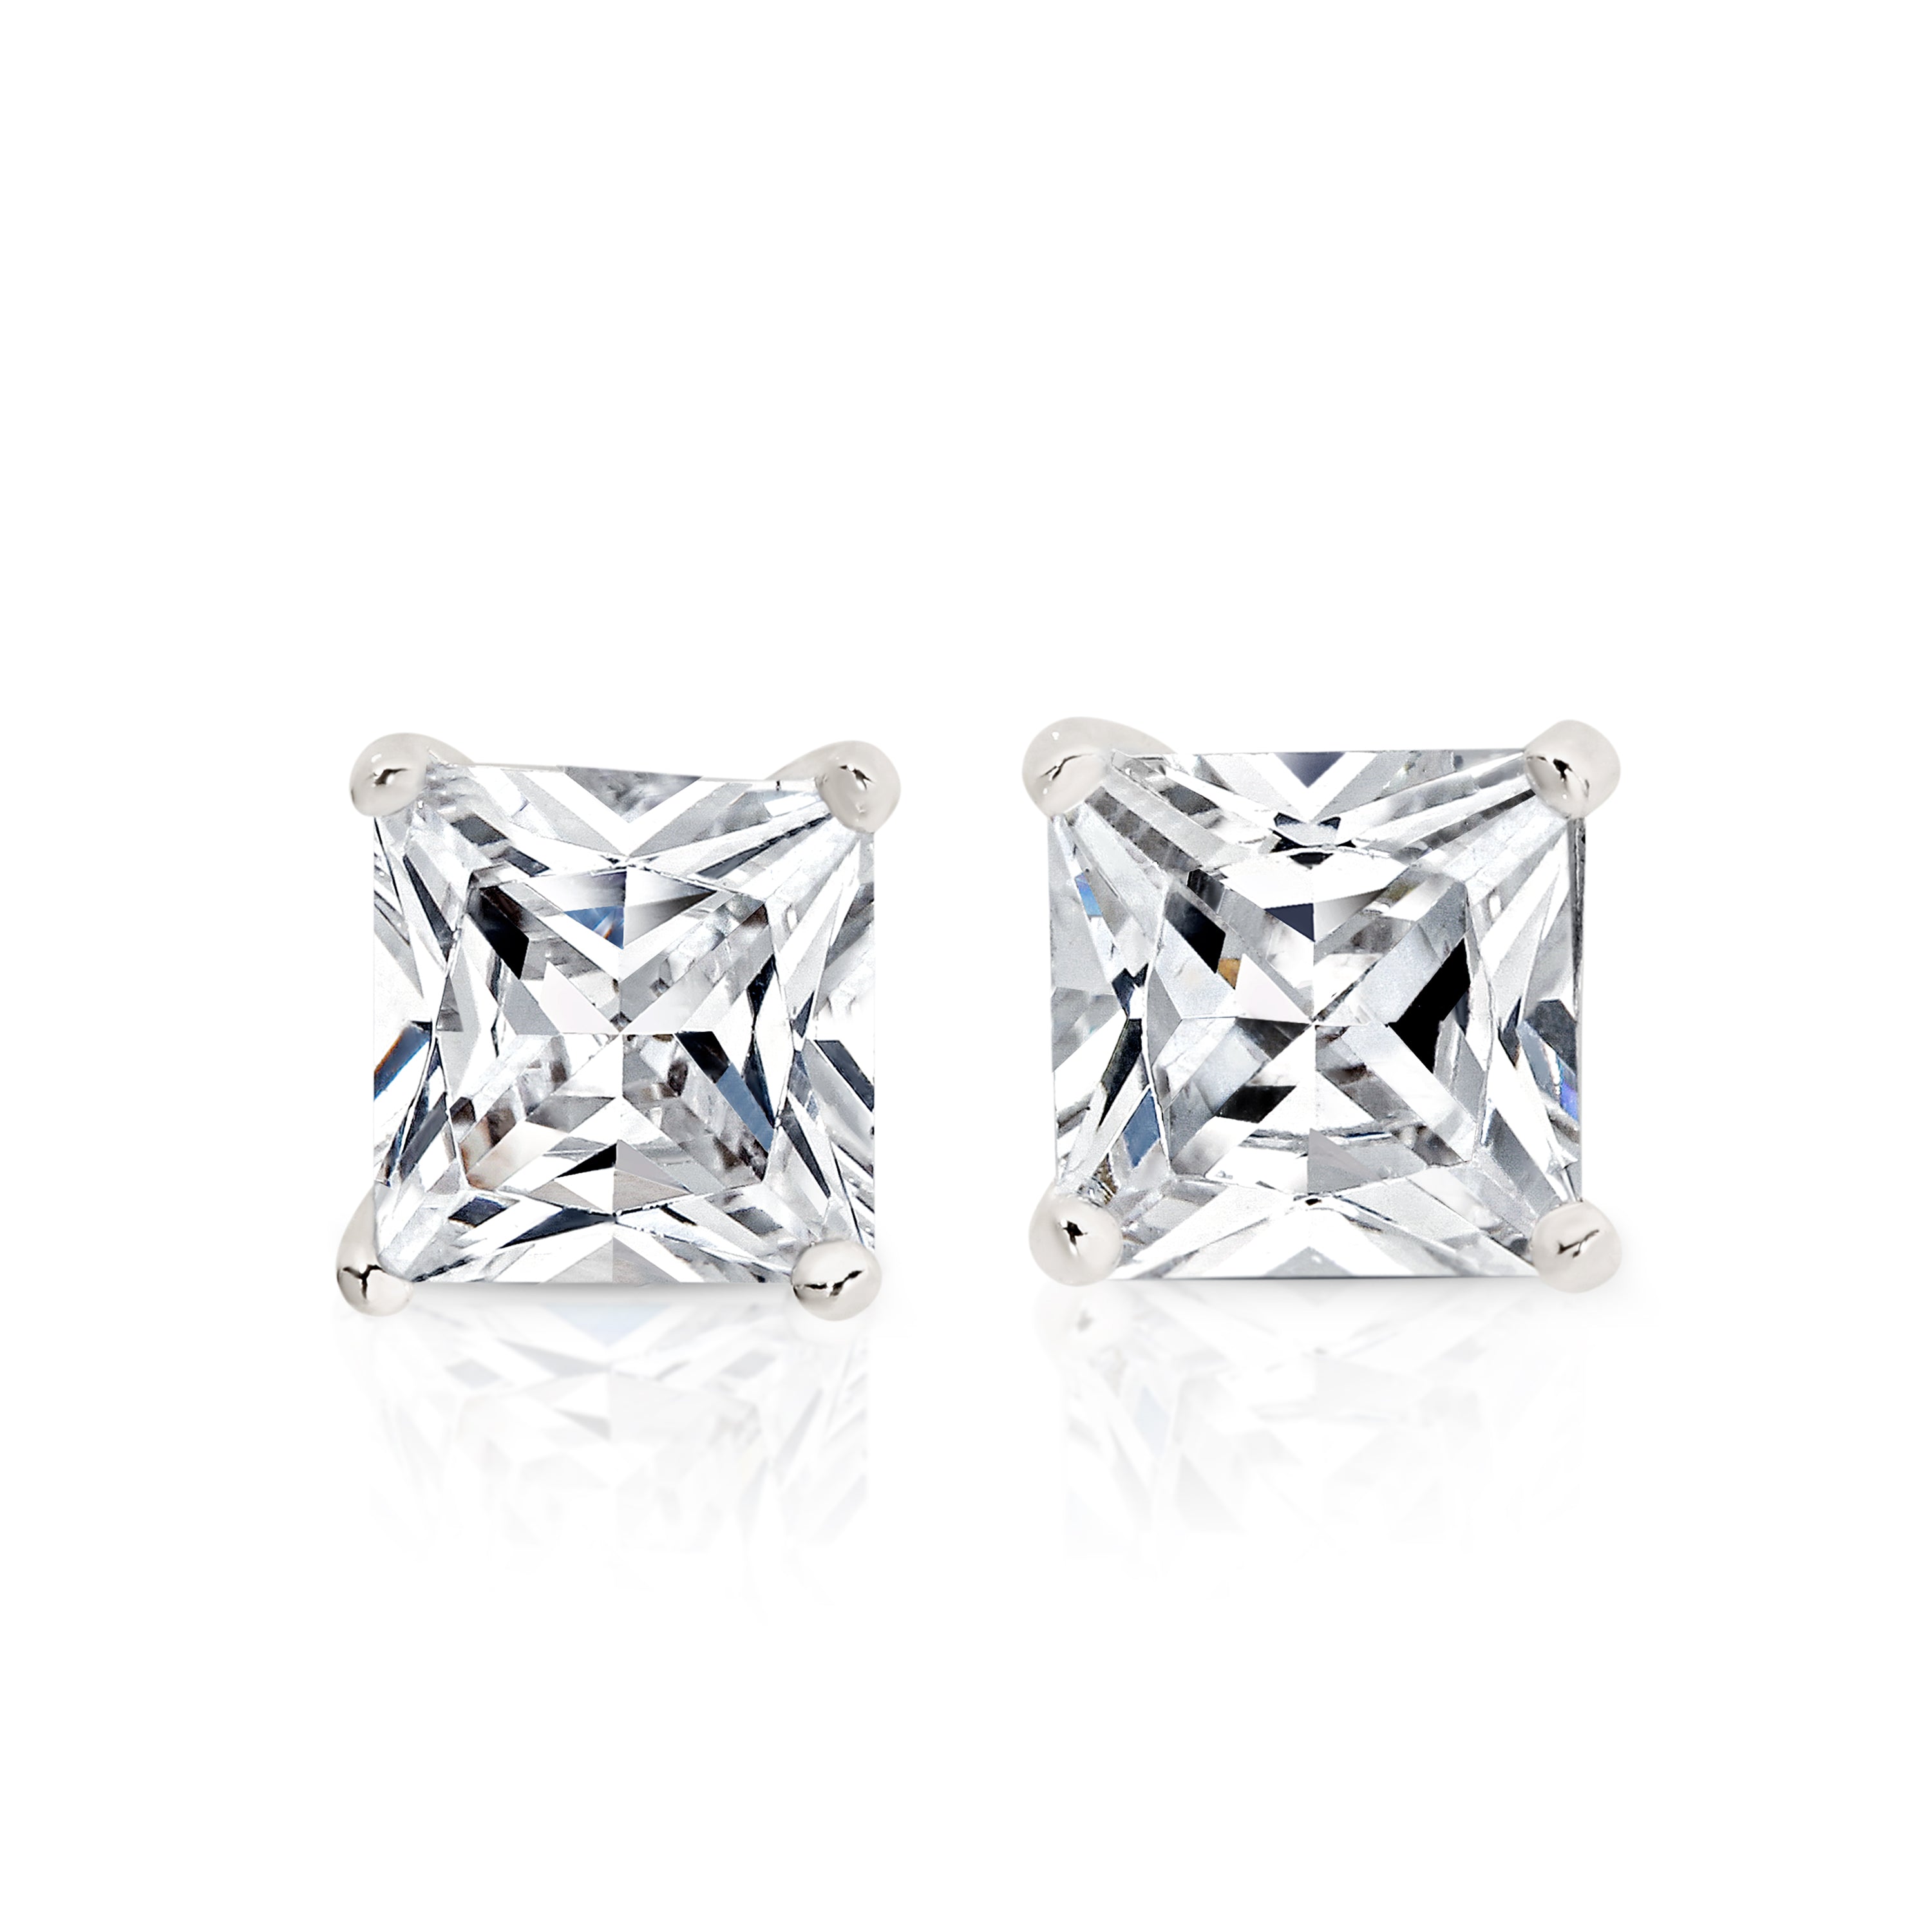 Silver square cubic zirconia studs 5mm